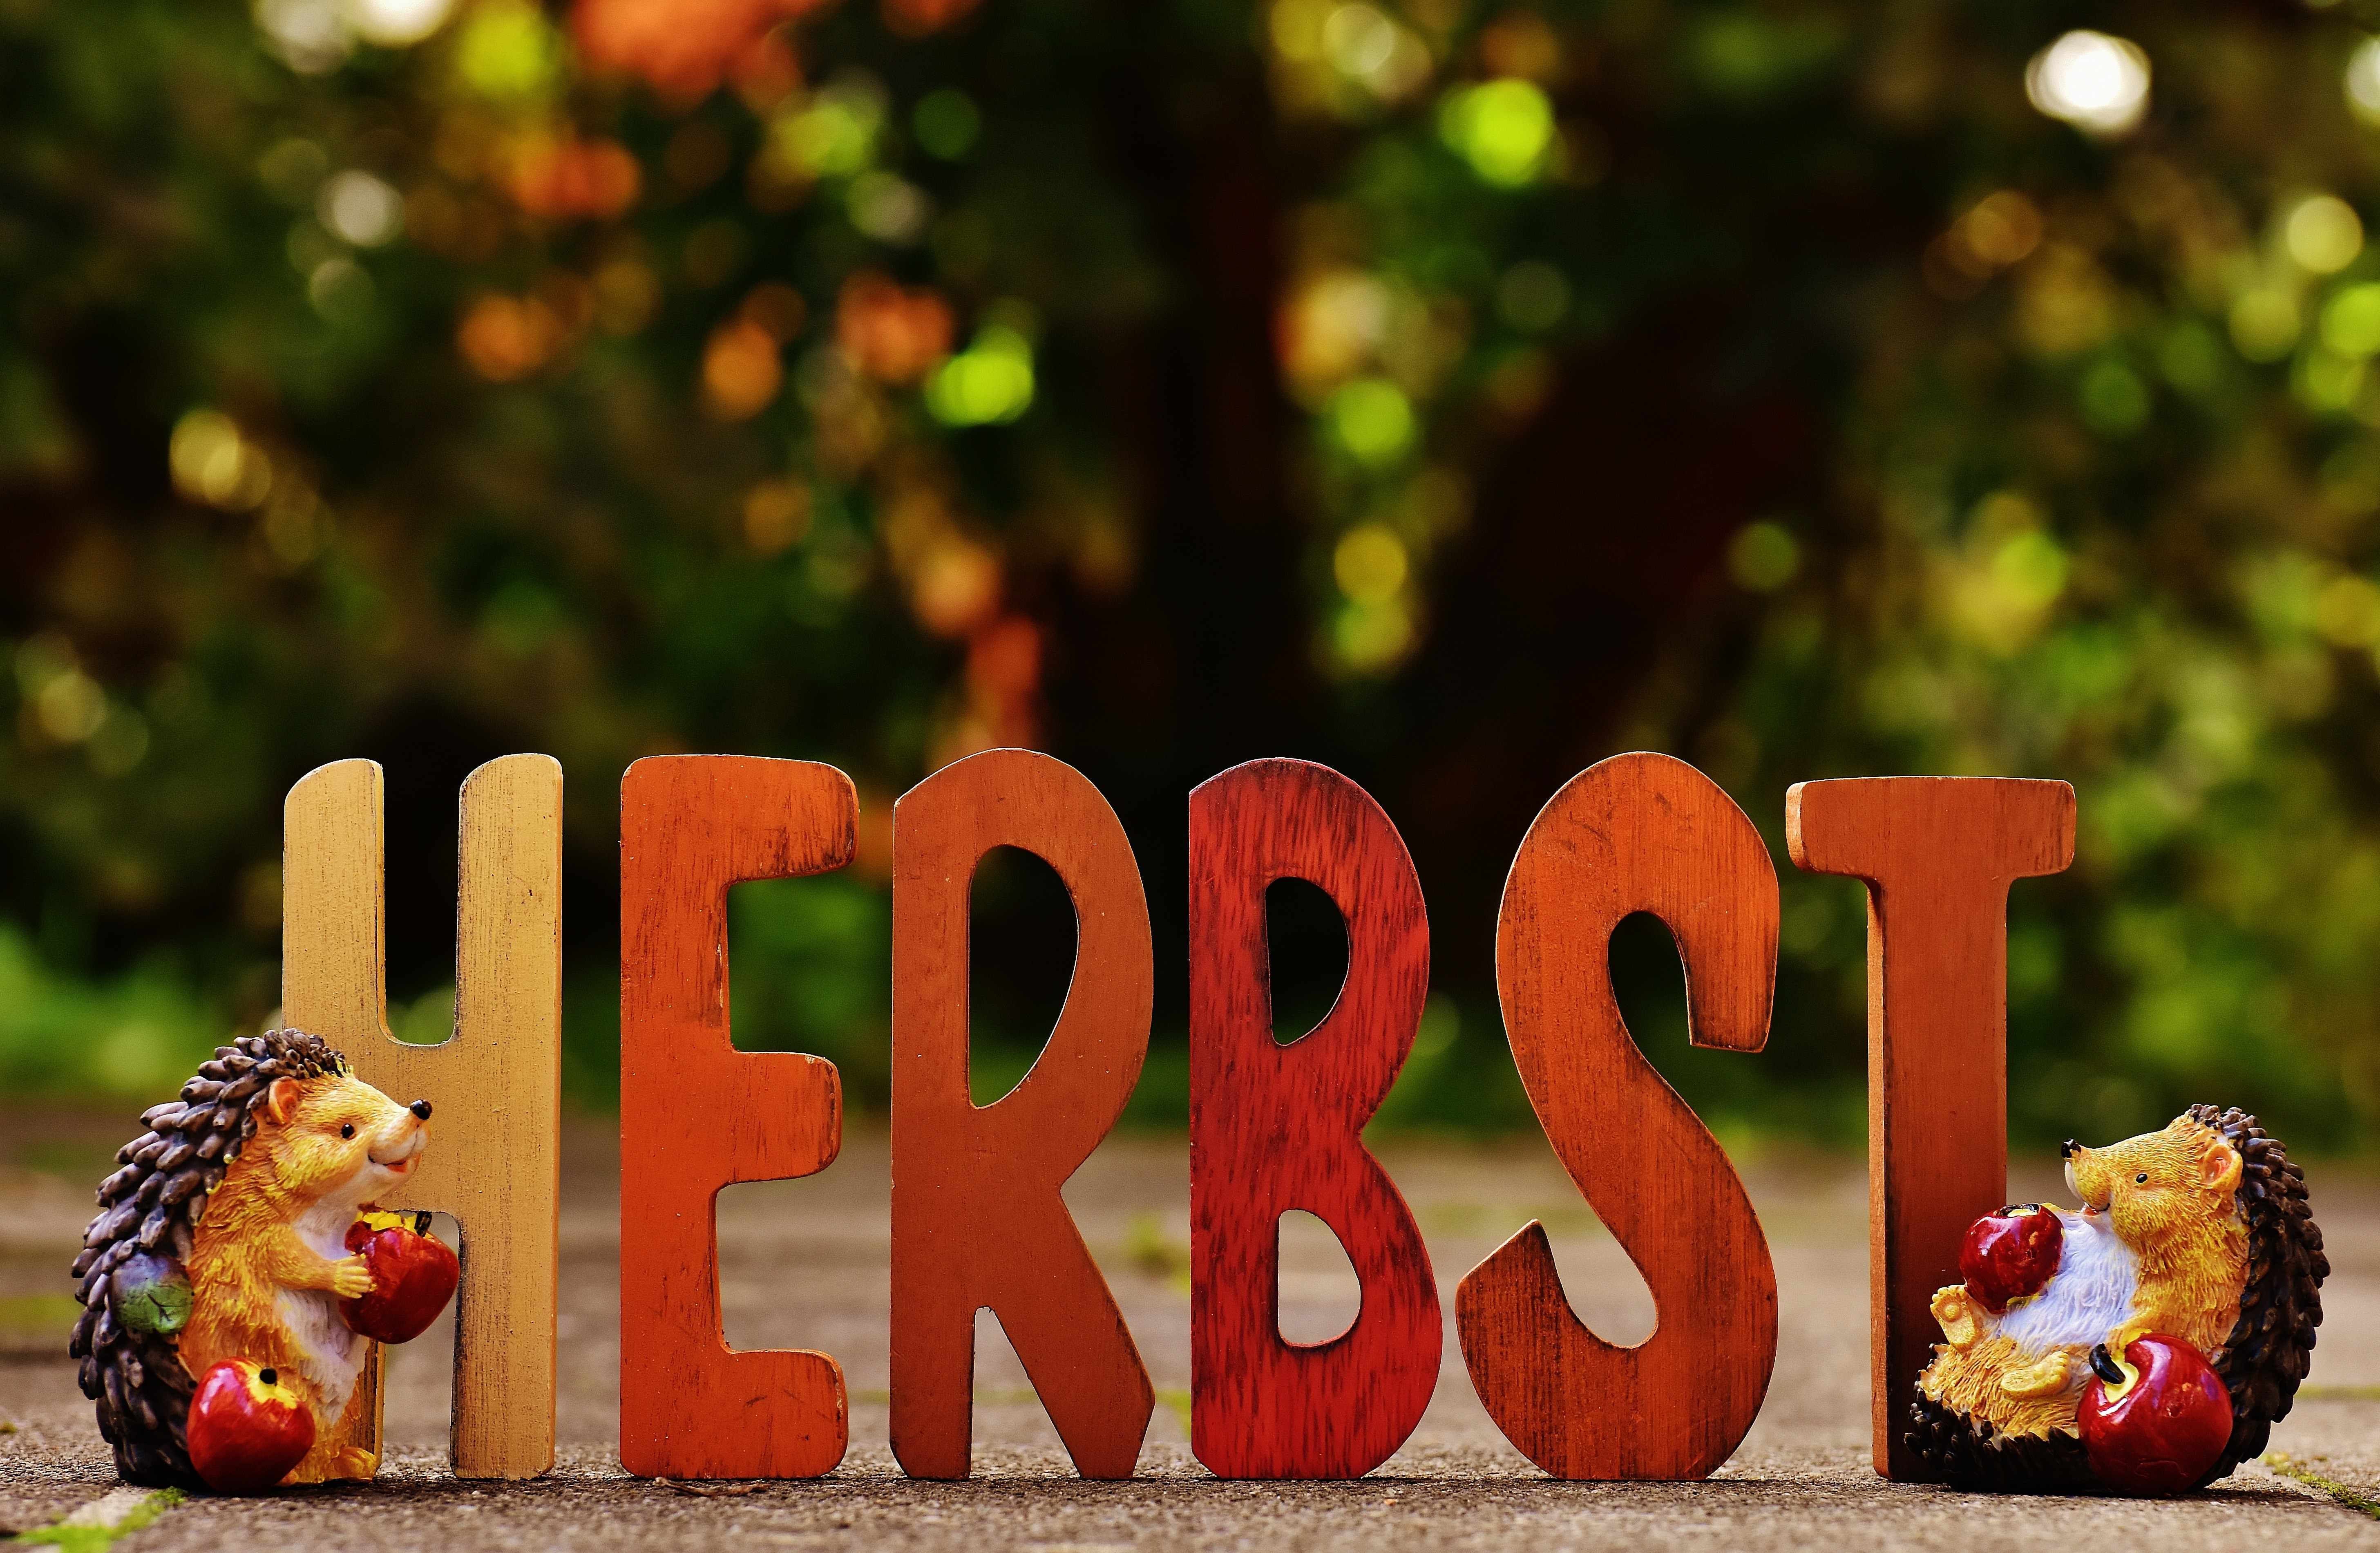 brown wooden herbst text table decoration